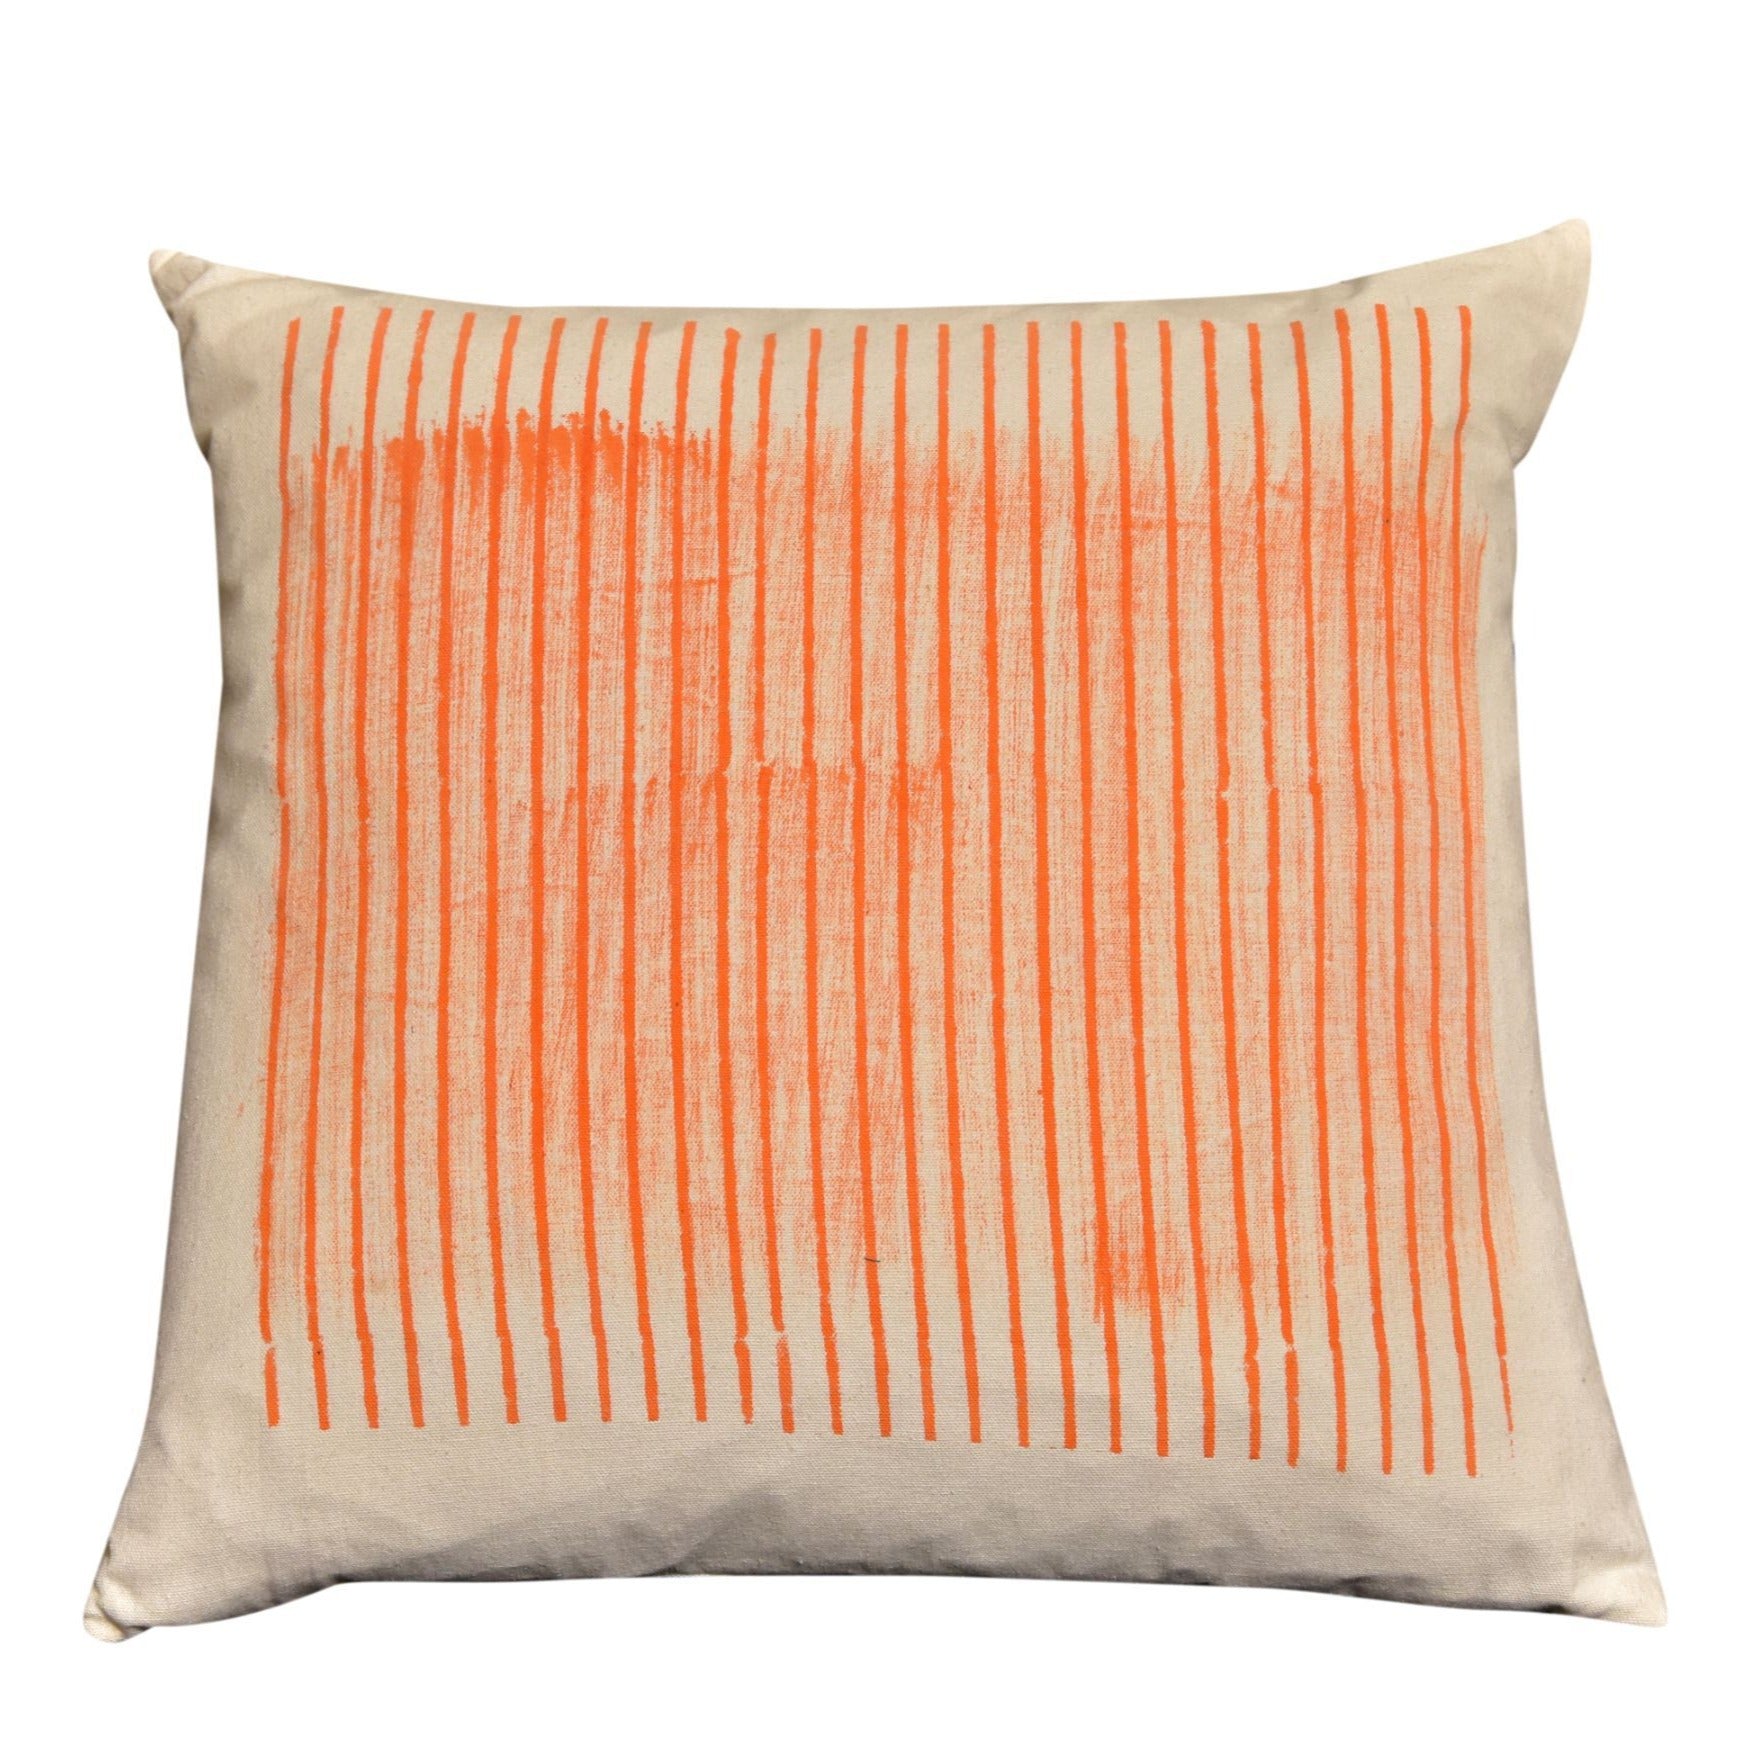 Neelofar's printed cushion cover on off white background - 18x18 Inches